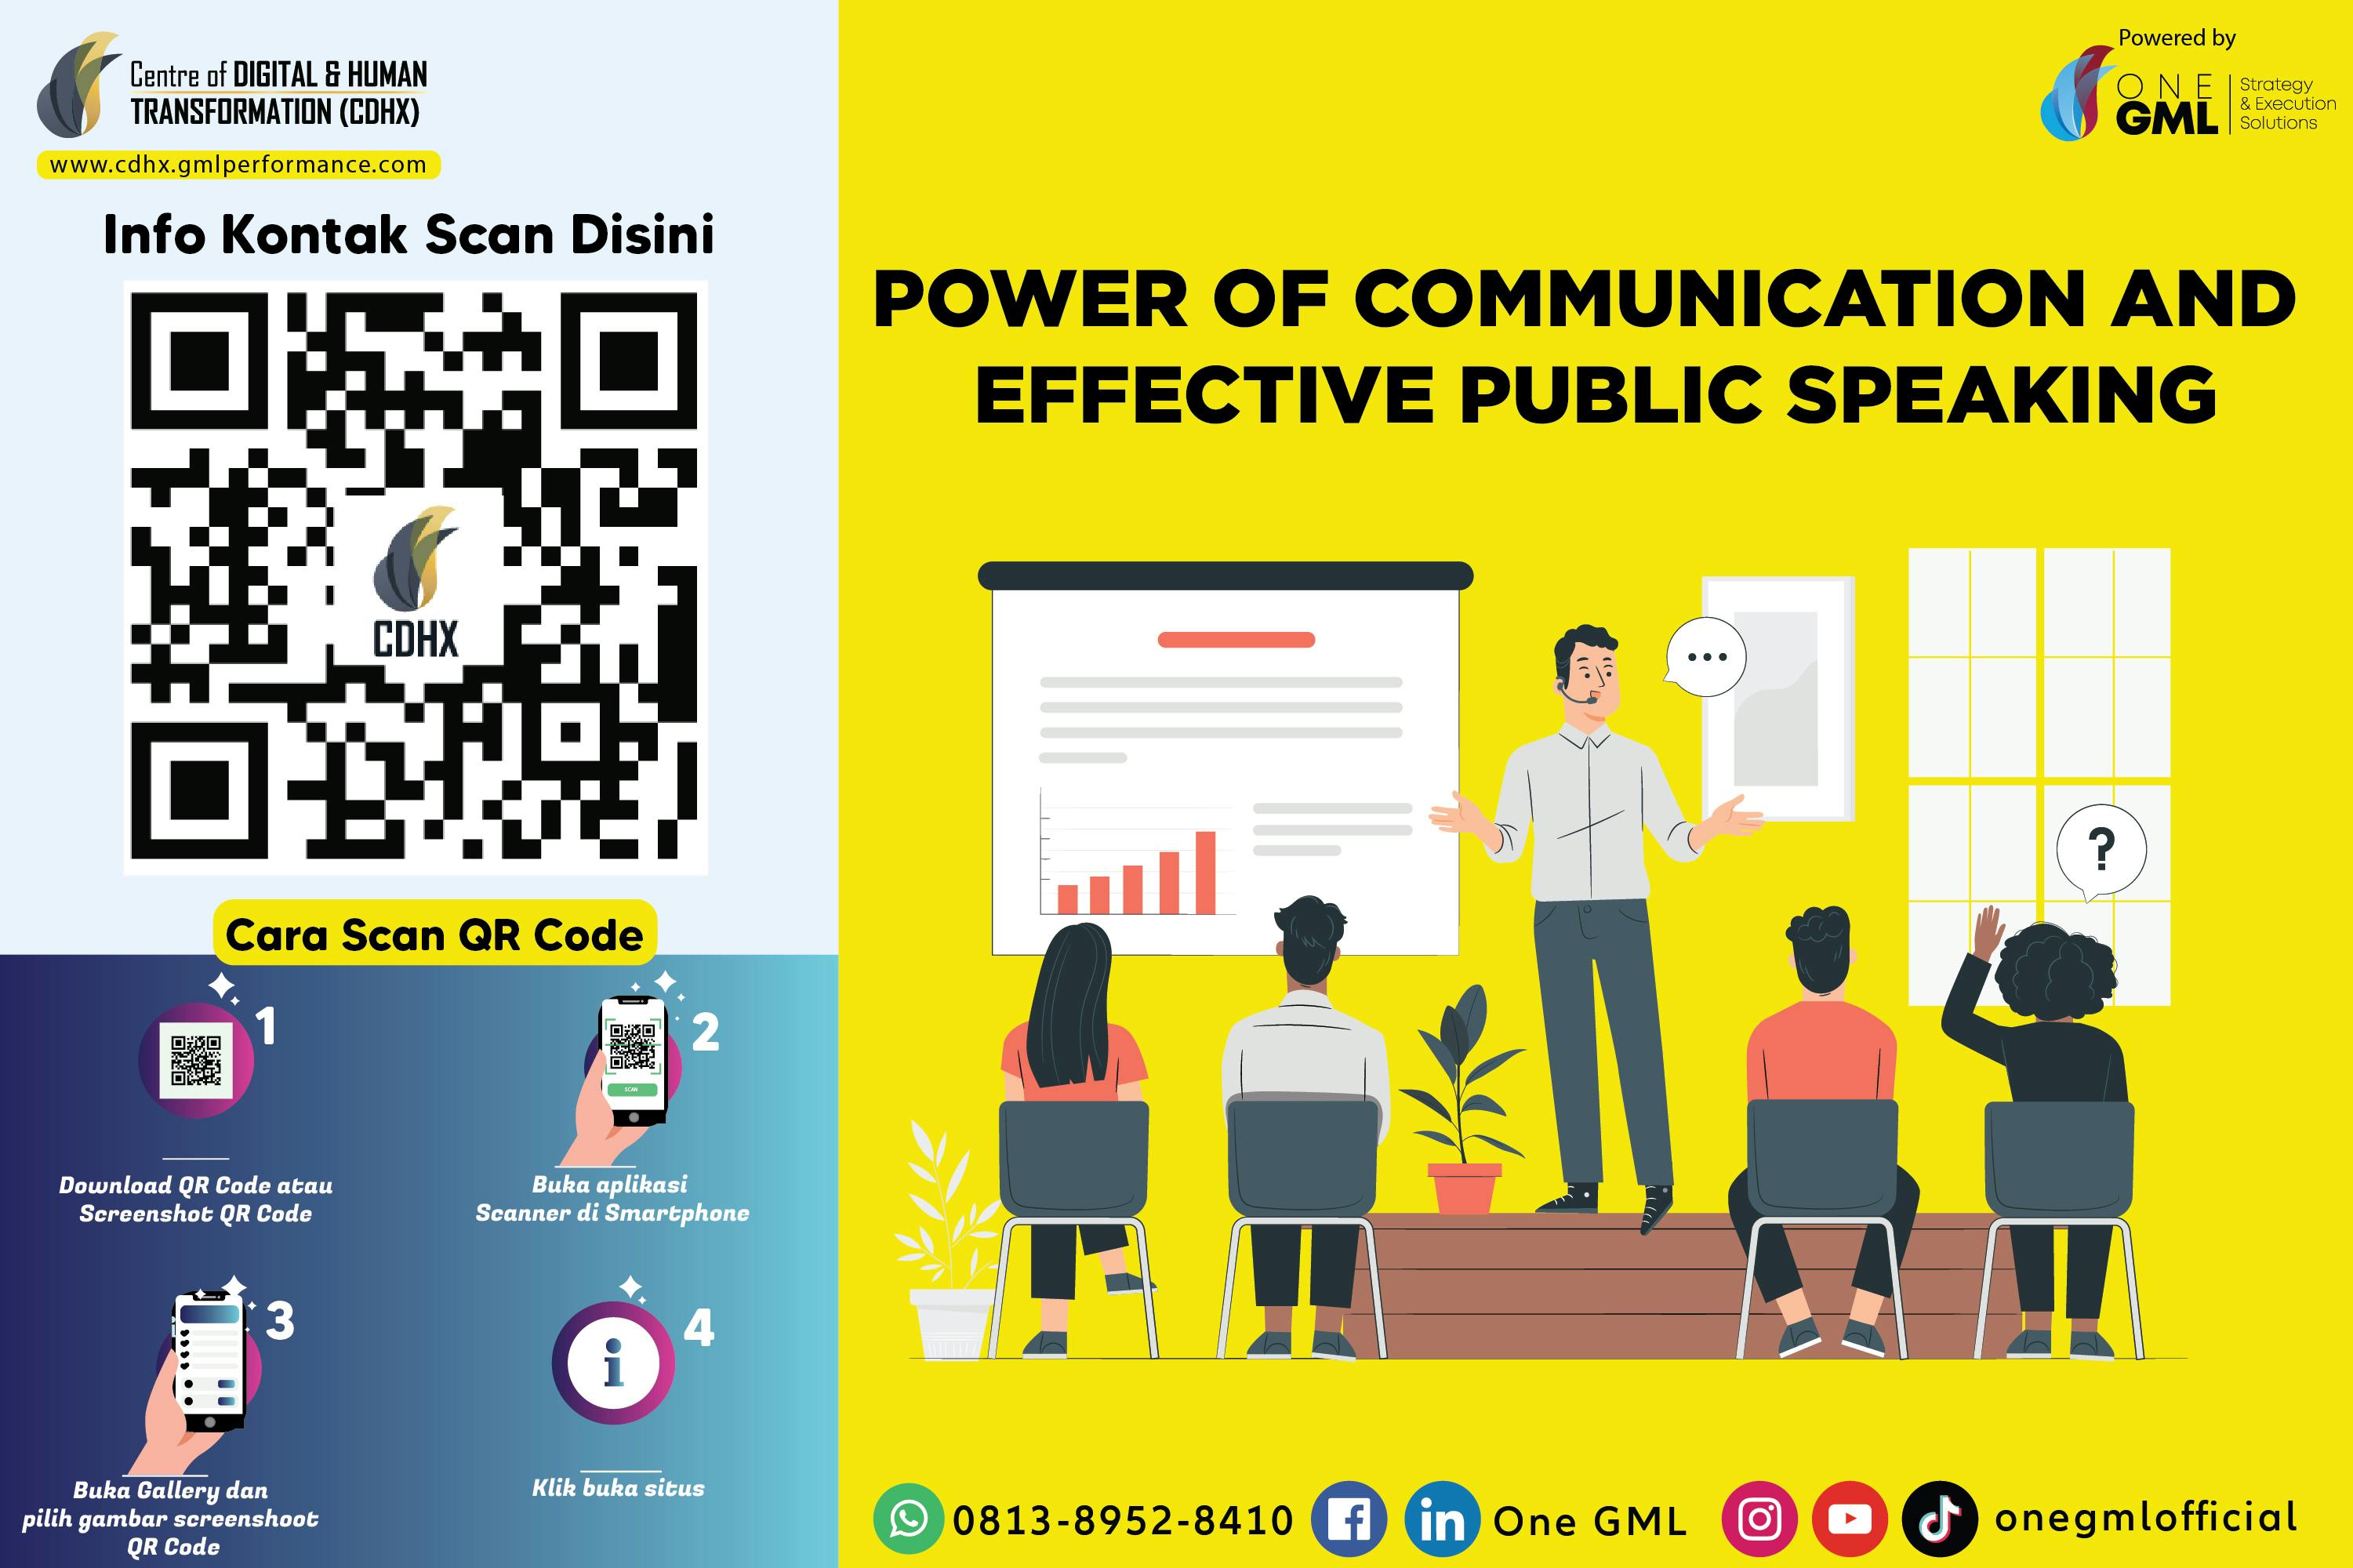 Power of Communication and Effective Public Speaking